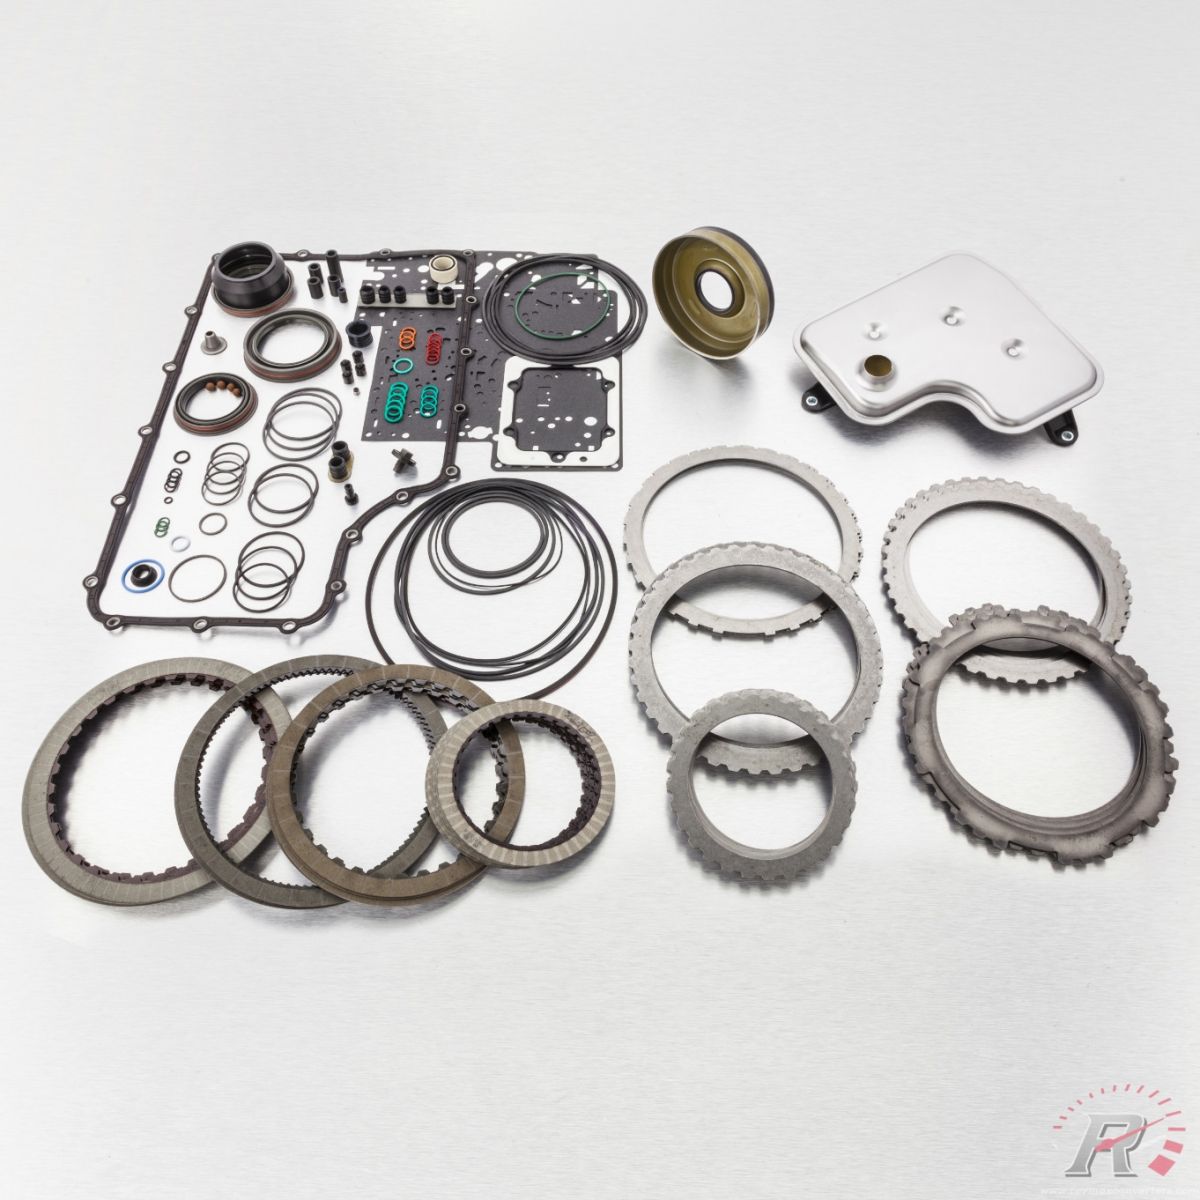 Revmax - Revmax High Performance Rebuild Kit For 11-17 Ford 6.7L Powerstroke With 6R140 Transmissions